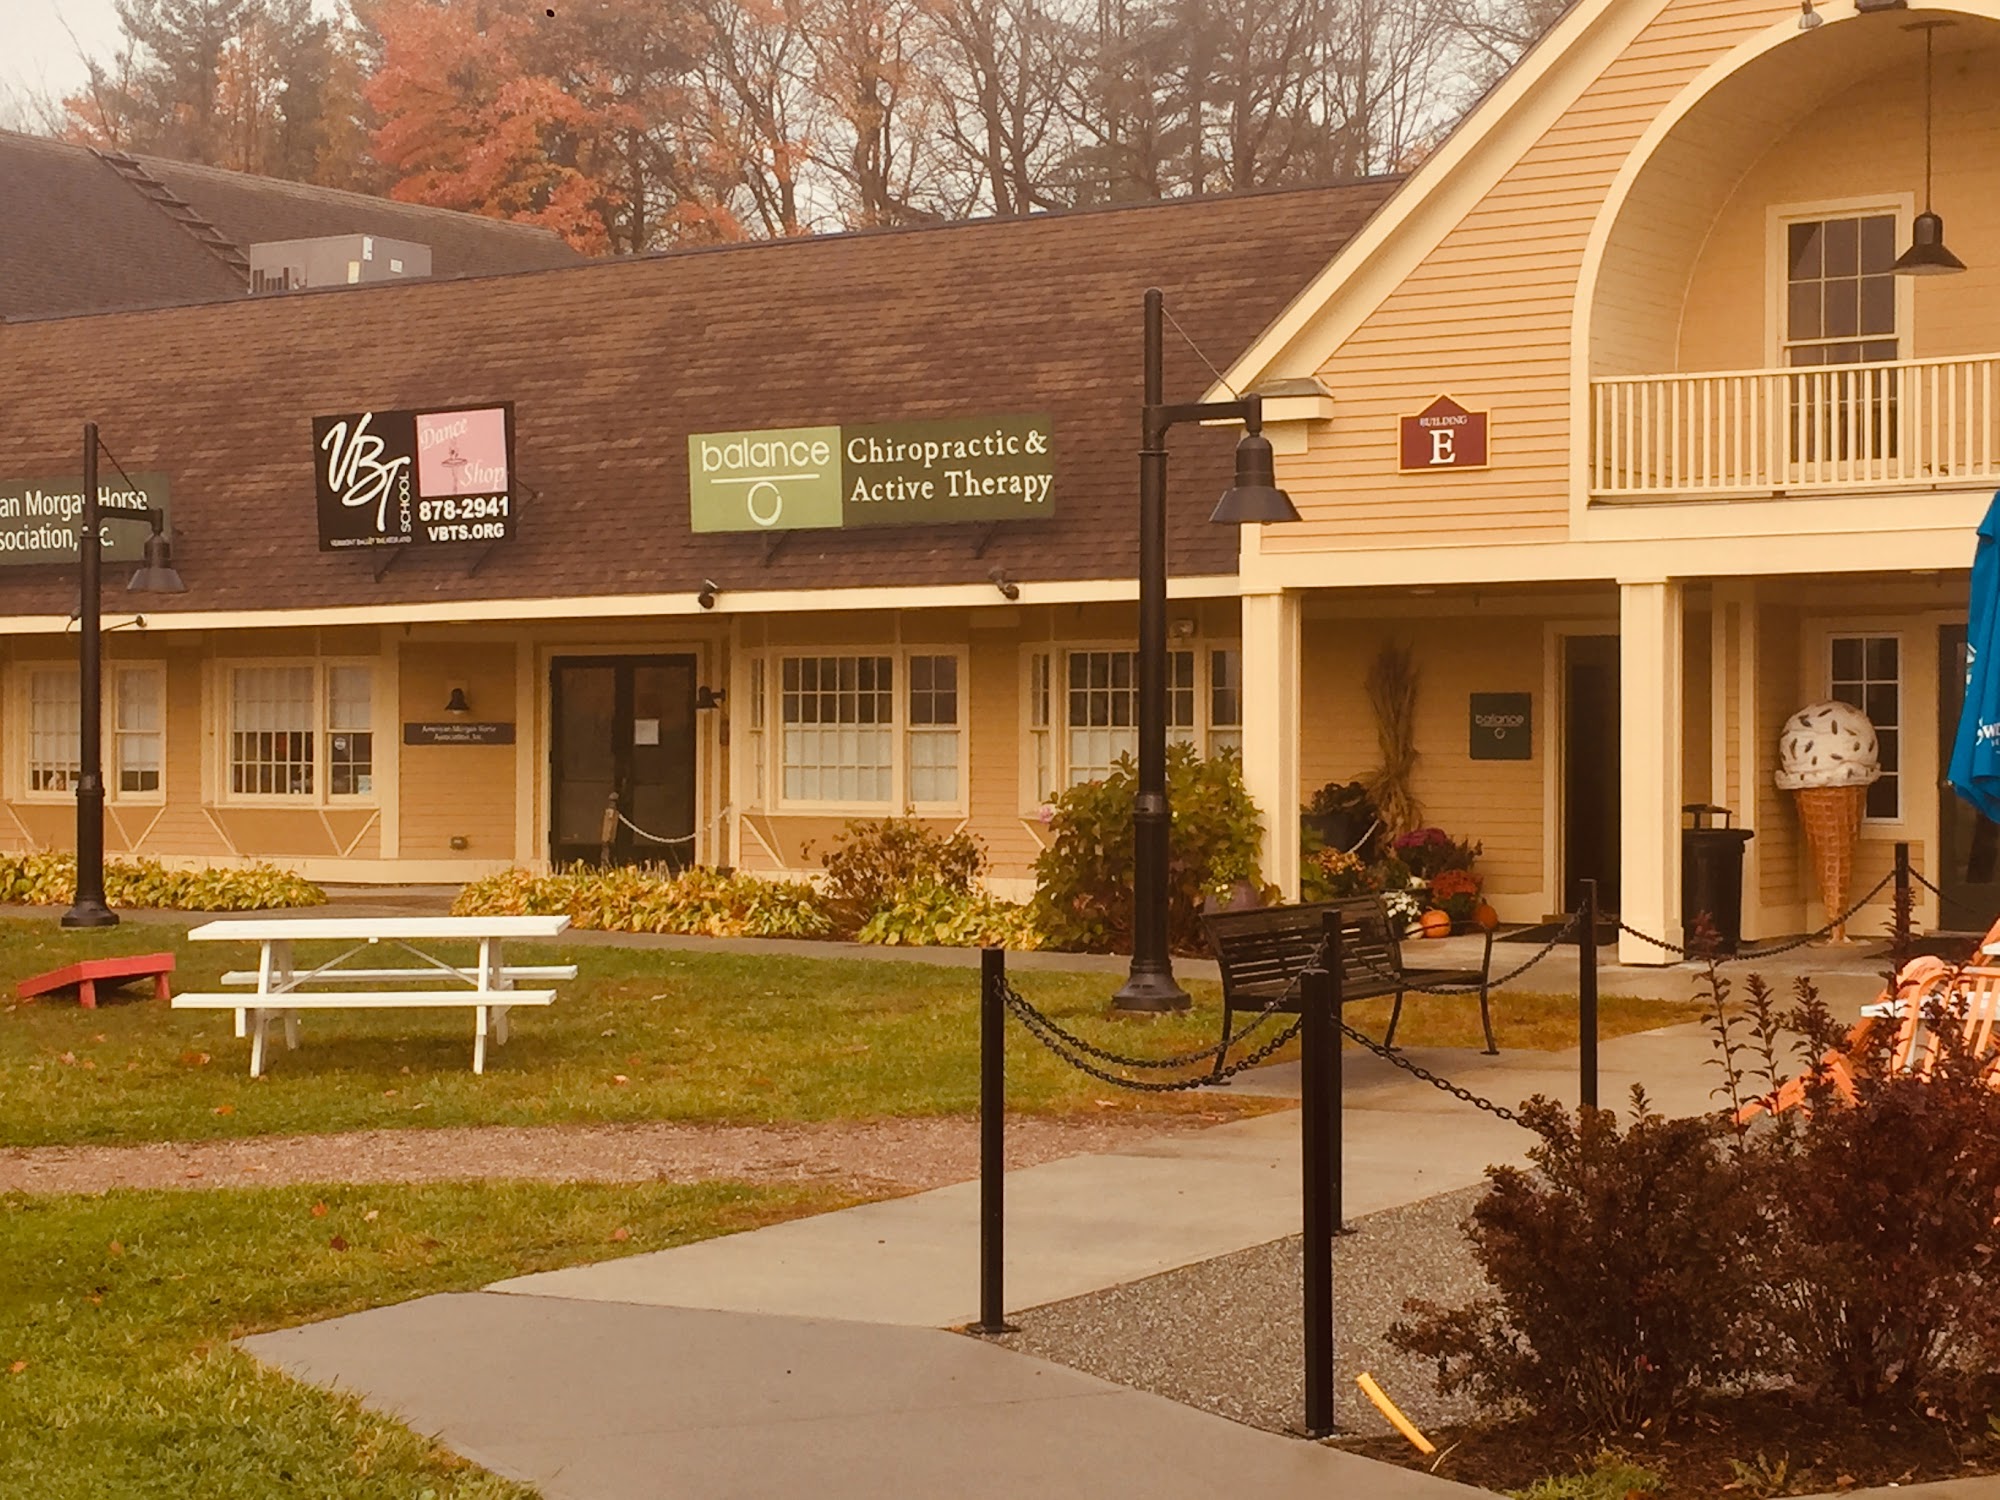 Balance Chiropractic & Active Therapy 4066 Shelburne Rd 8 Bldg E, Shelburne Vermont 05482